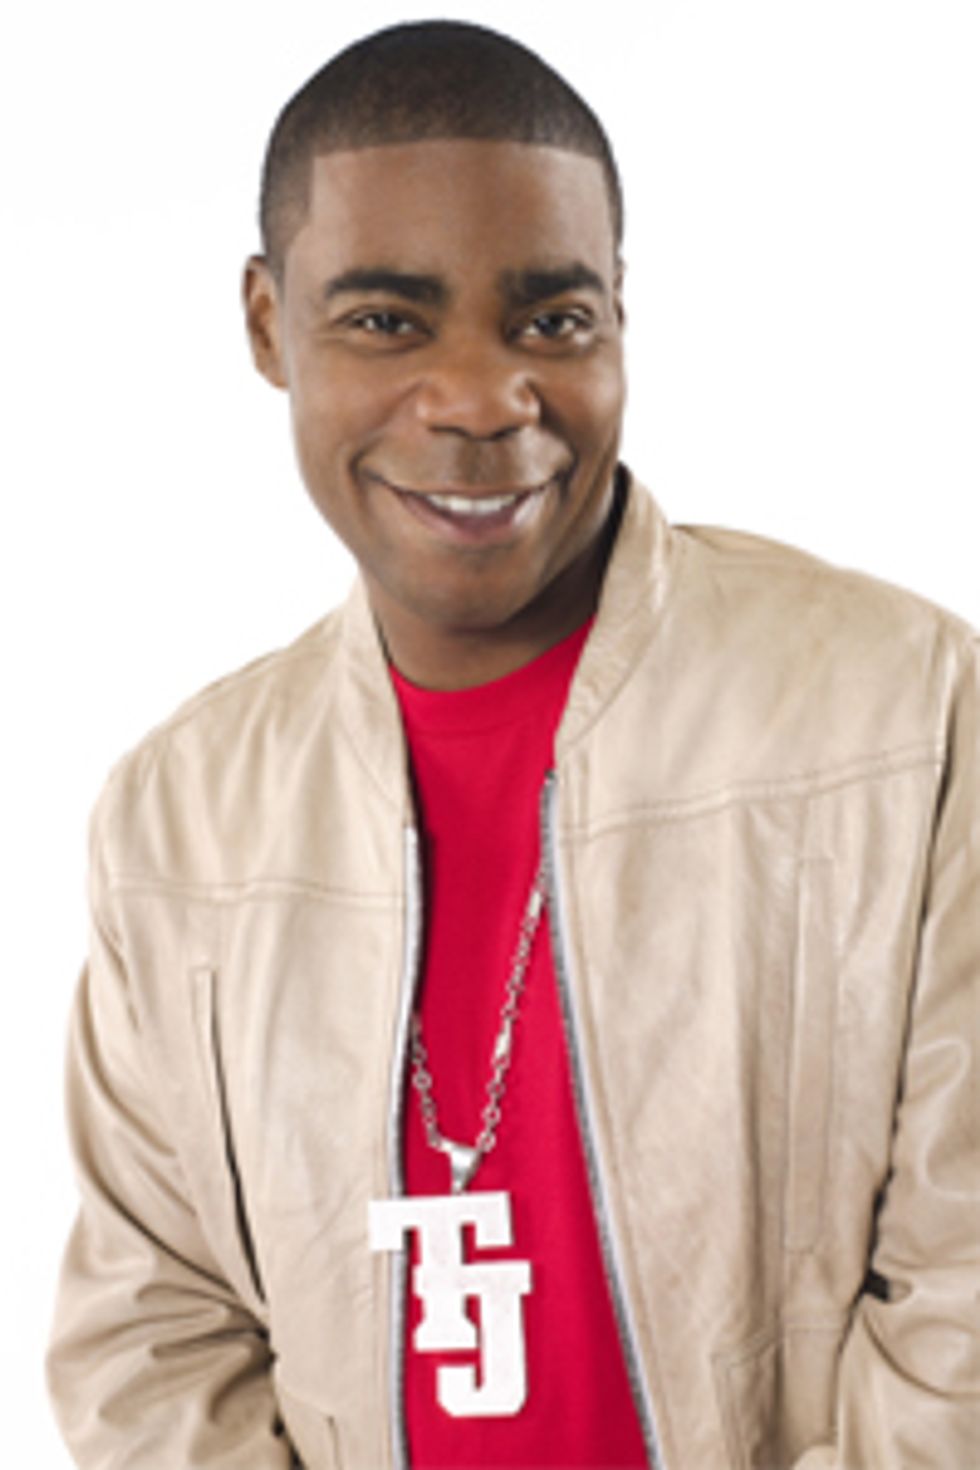 Will The Real Tracy Morgan Please Stand Up?